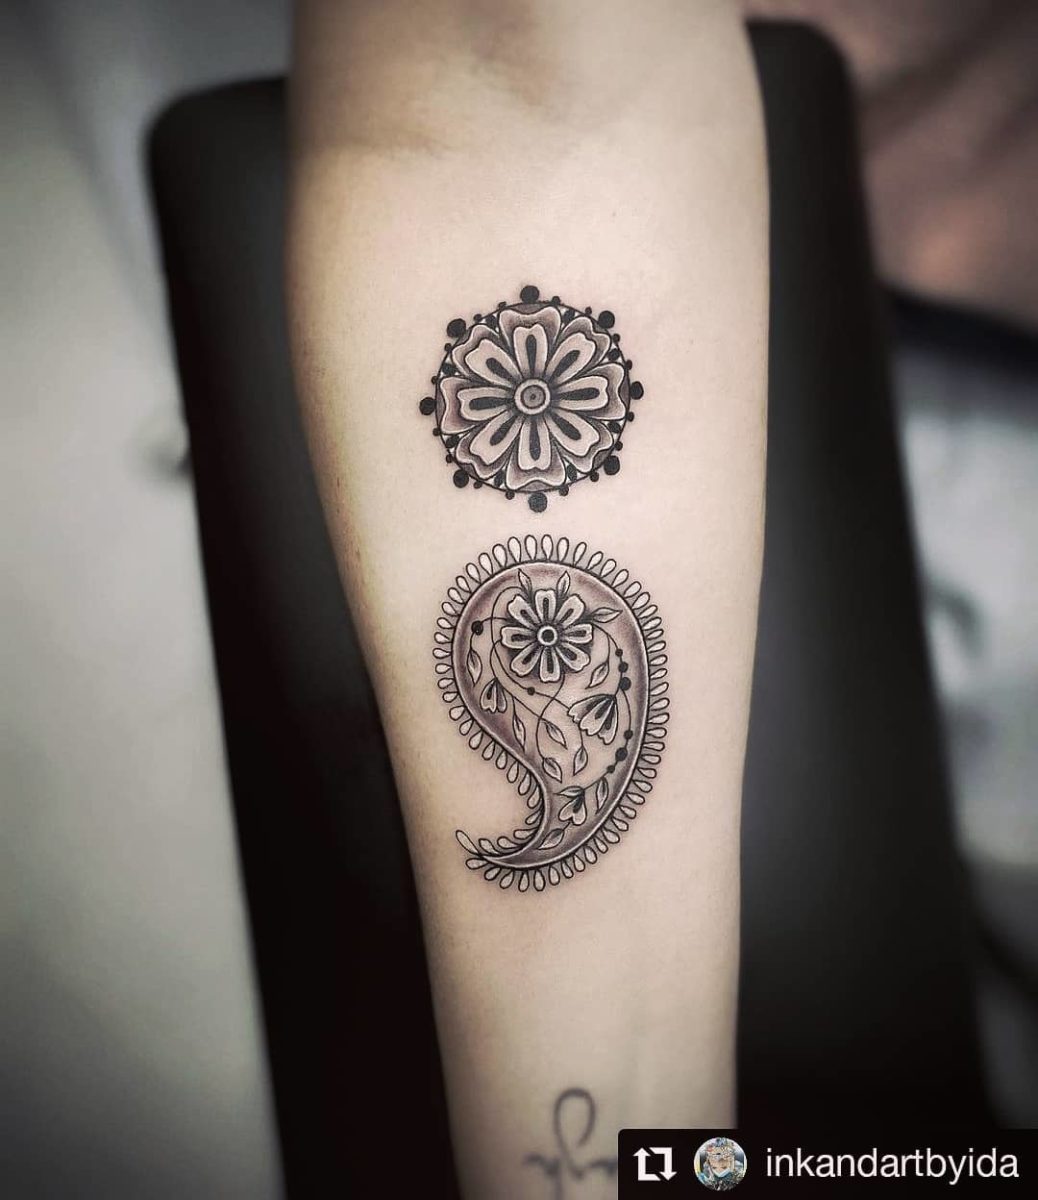 La nina Tattoos  Happy Diwali  We wish our tattoo family a good health  in this upcoming year and always remember there is a lot to be thankful  about no matter